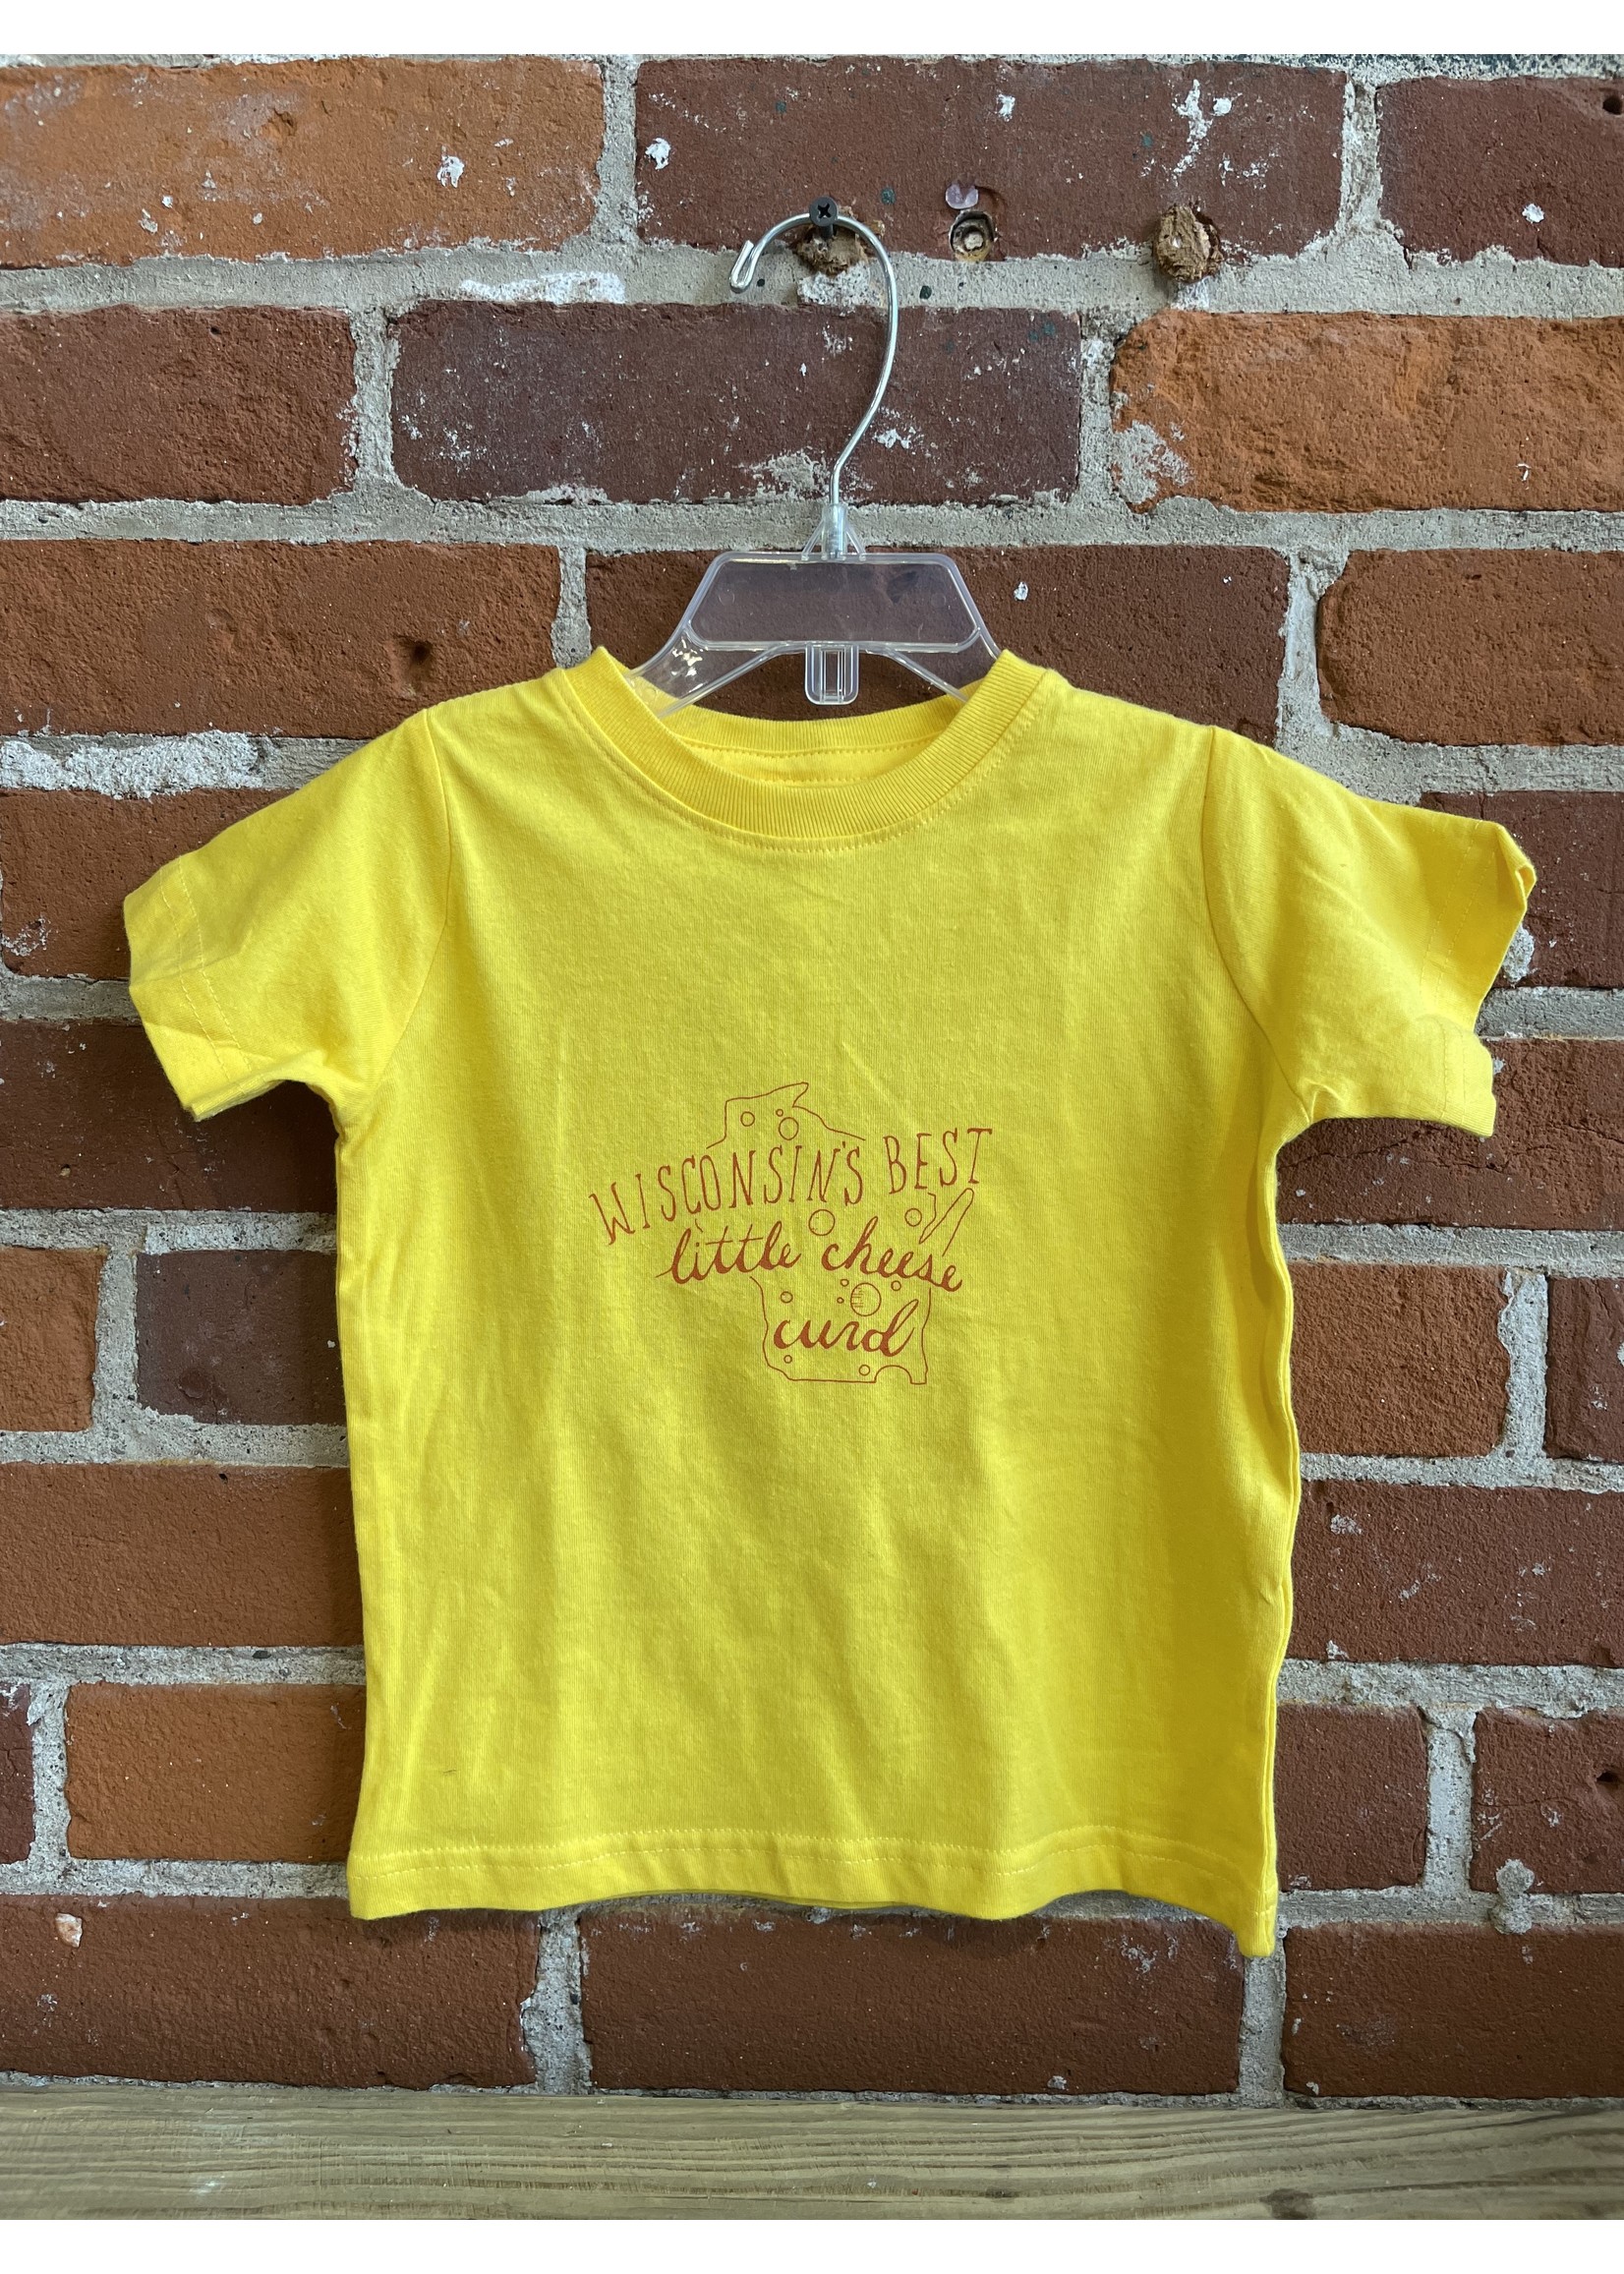 Tangled Up In Hue Wholesale Wisconsins Best Little Cheesecurd Yellow Youth T-Shirt